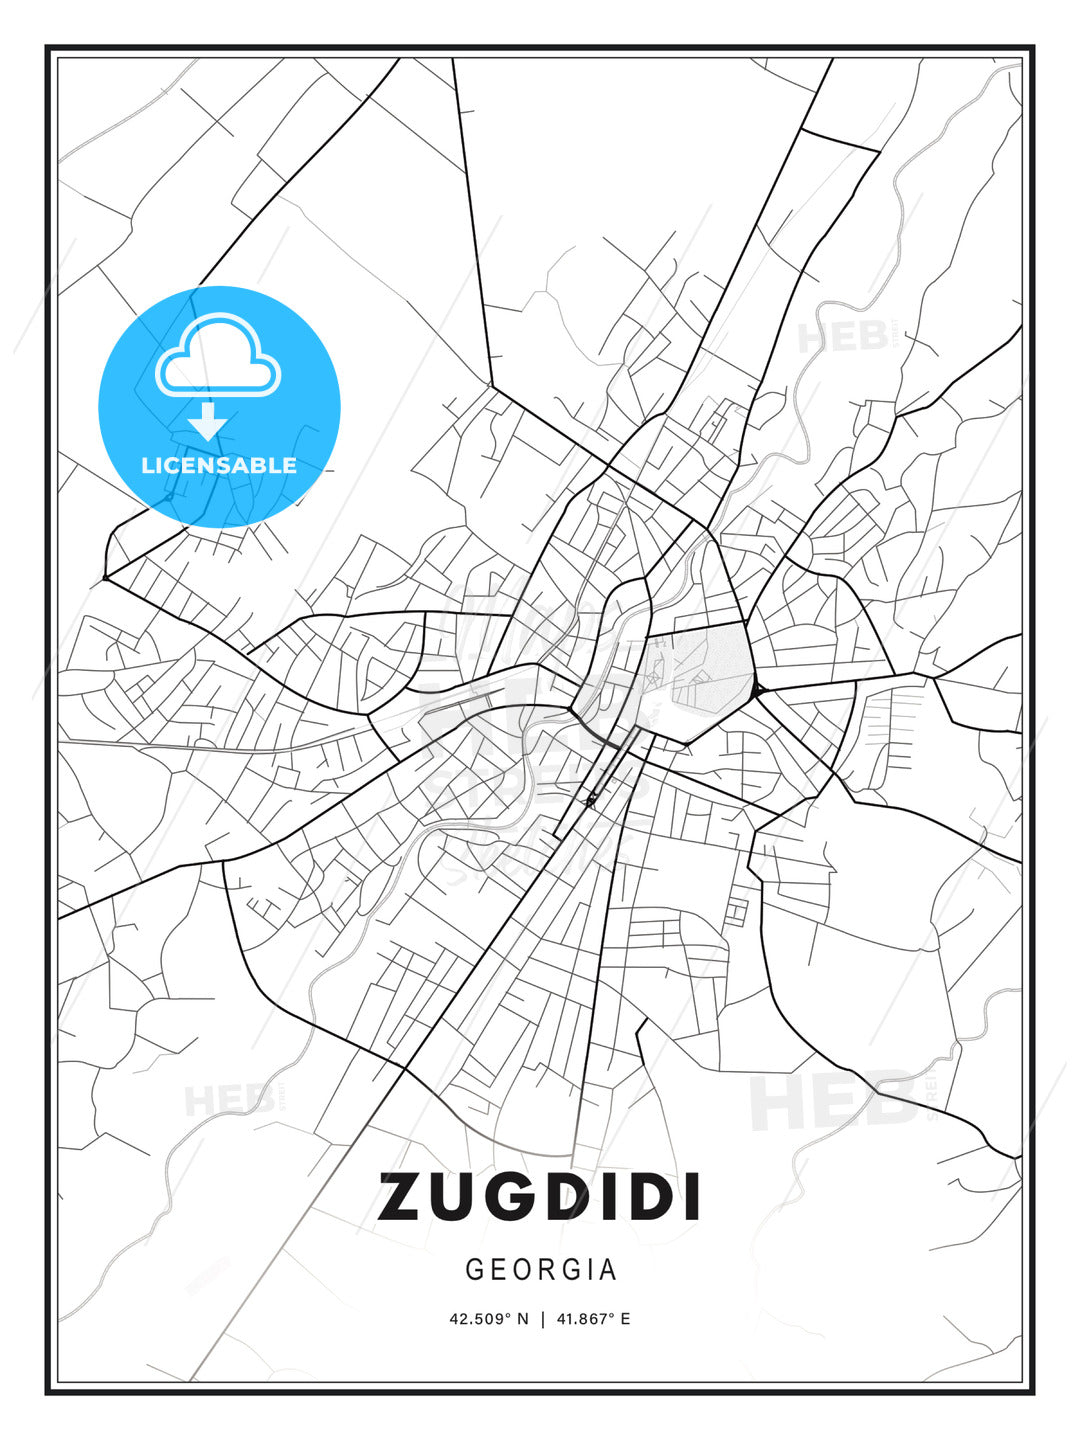 Zugdidi, Georgia, Modern Print Template in Various Formats - HEBSTREITS Sketches